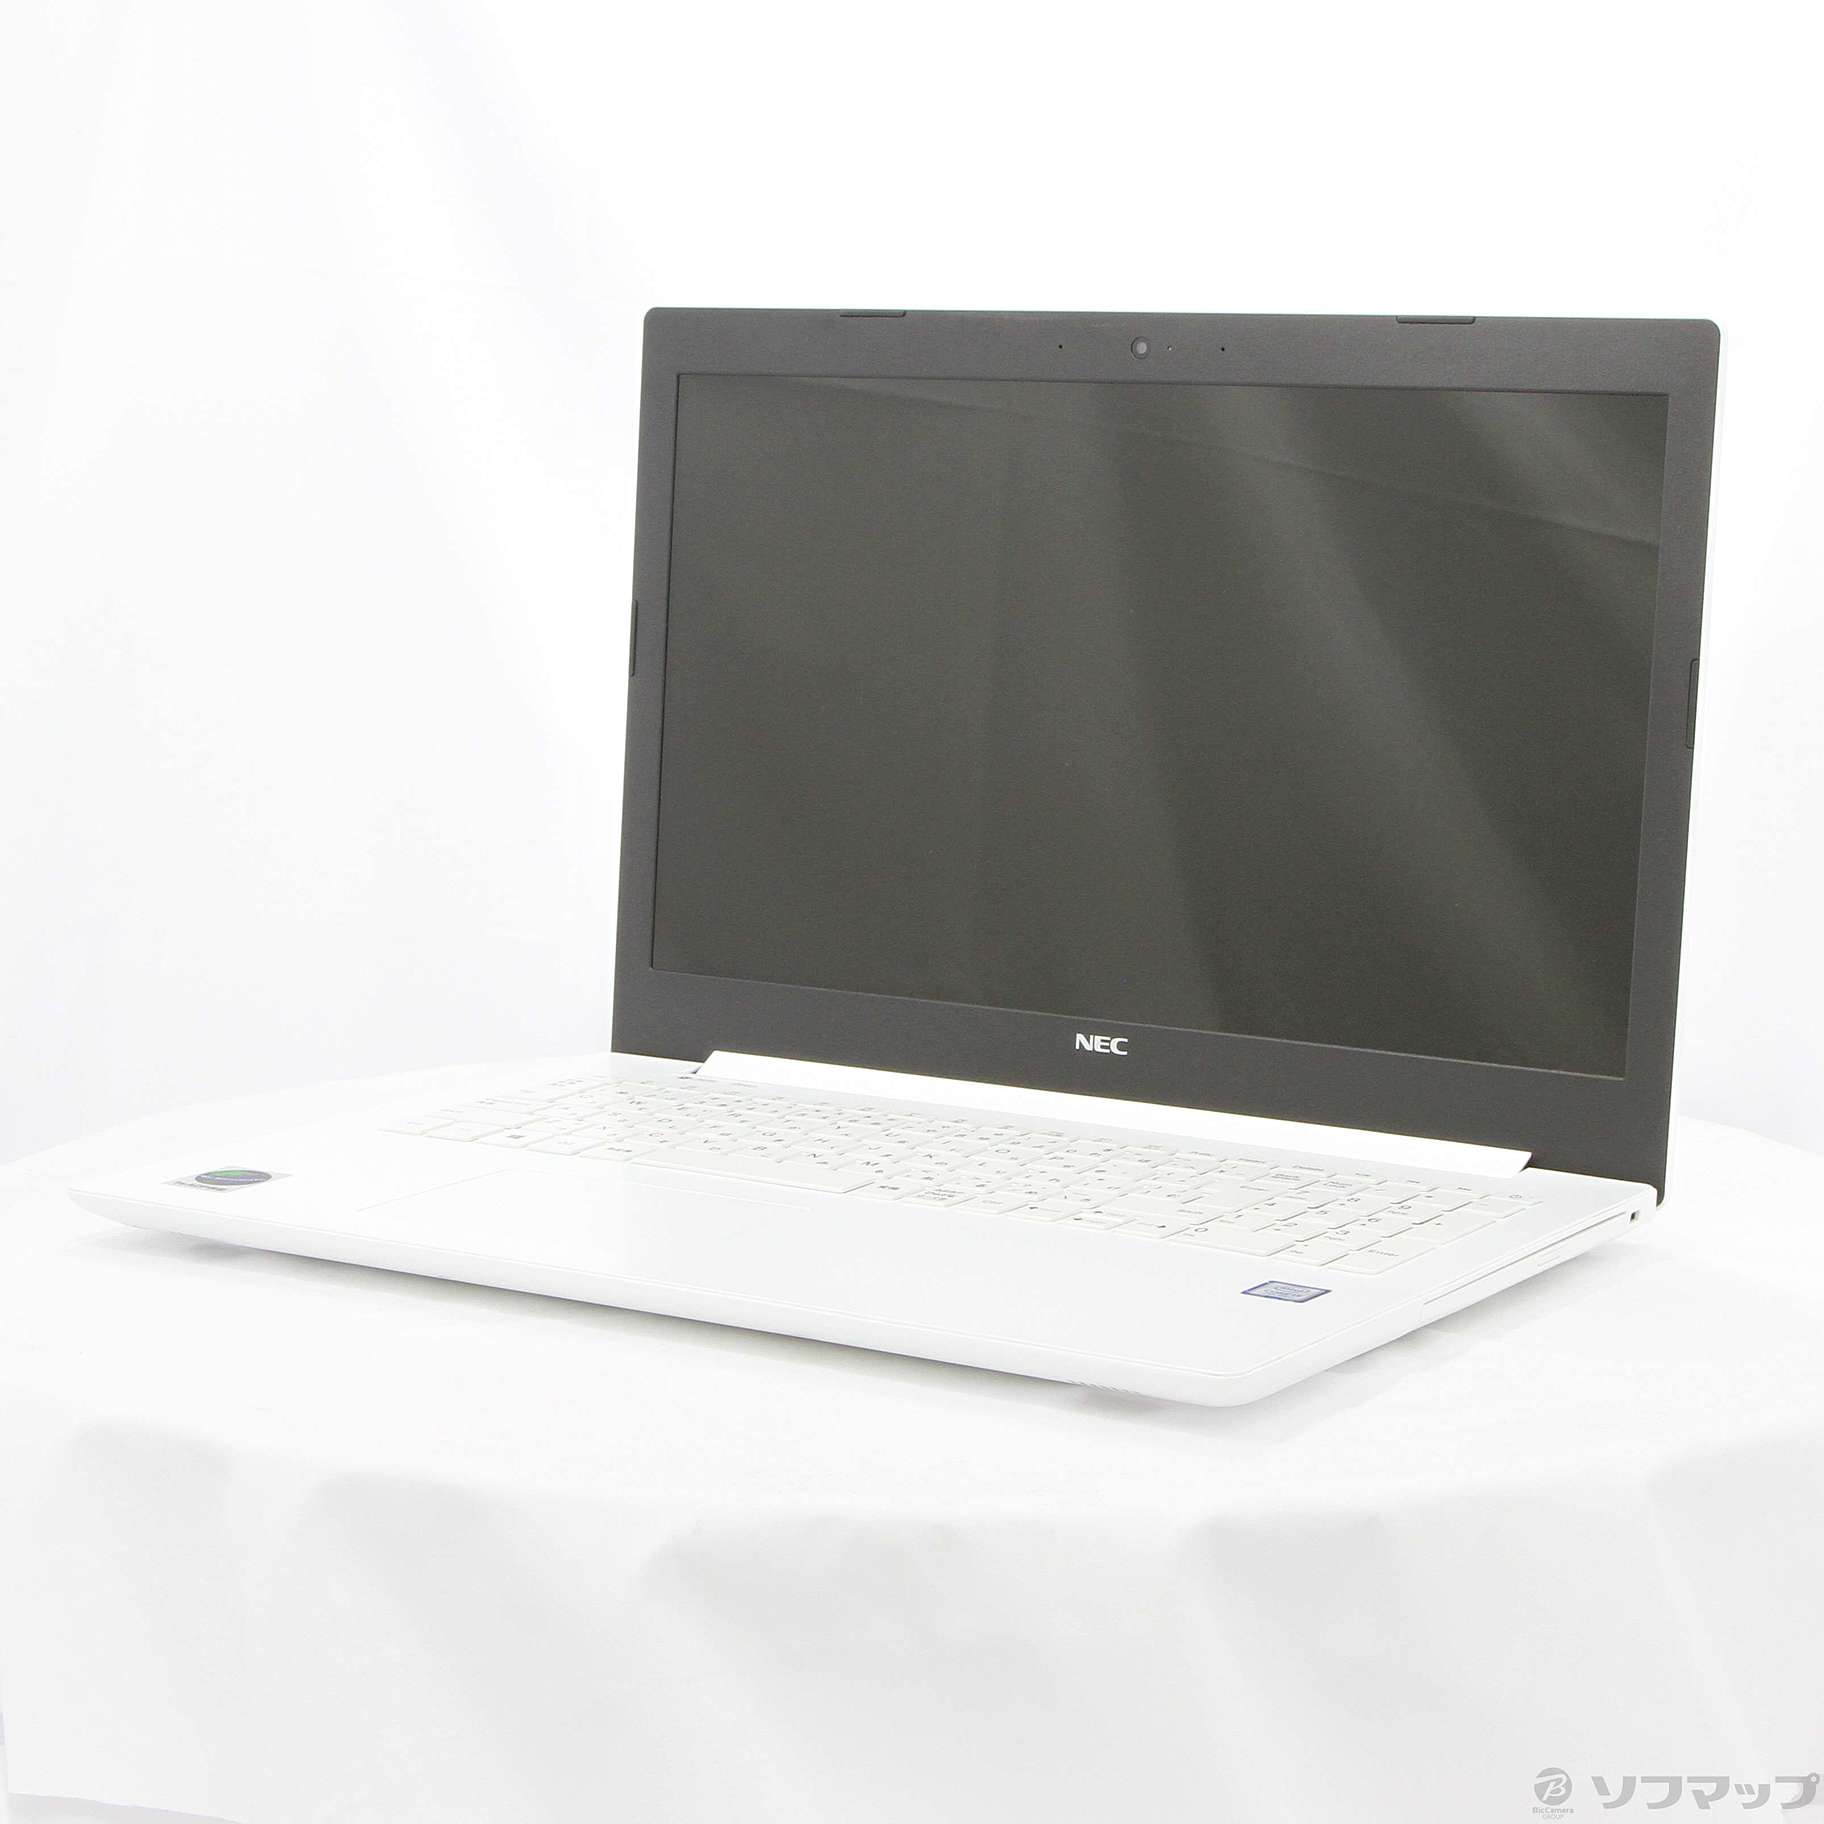 LAVIE Direct NS PC-GN232JDAF 〔NEC Refreshed PC〕 〔Windows 10〕 ≪メーカー保証あり≫  ◇09/30(木)値下げ！